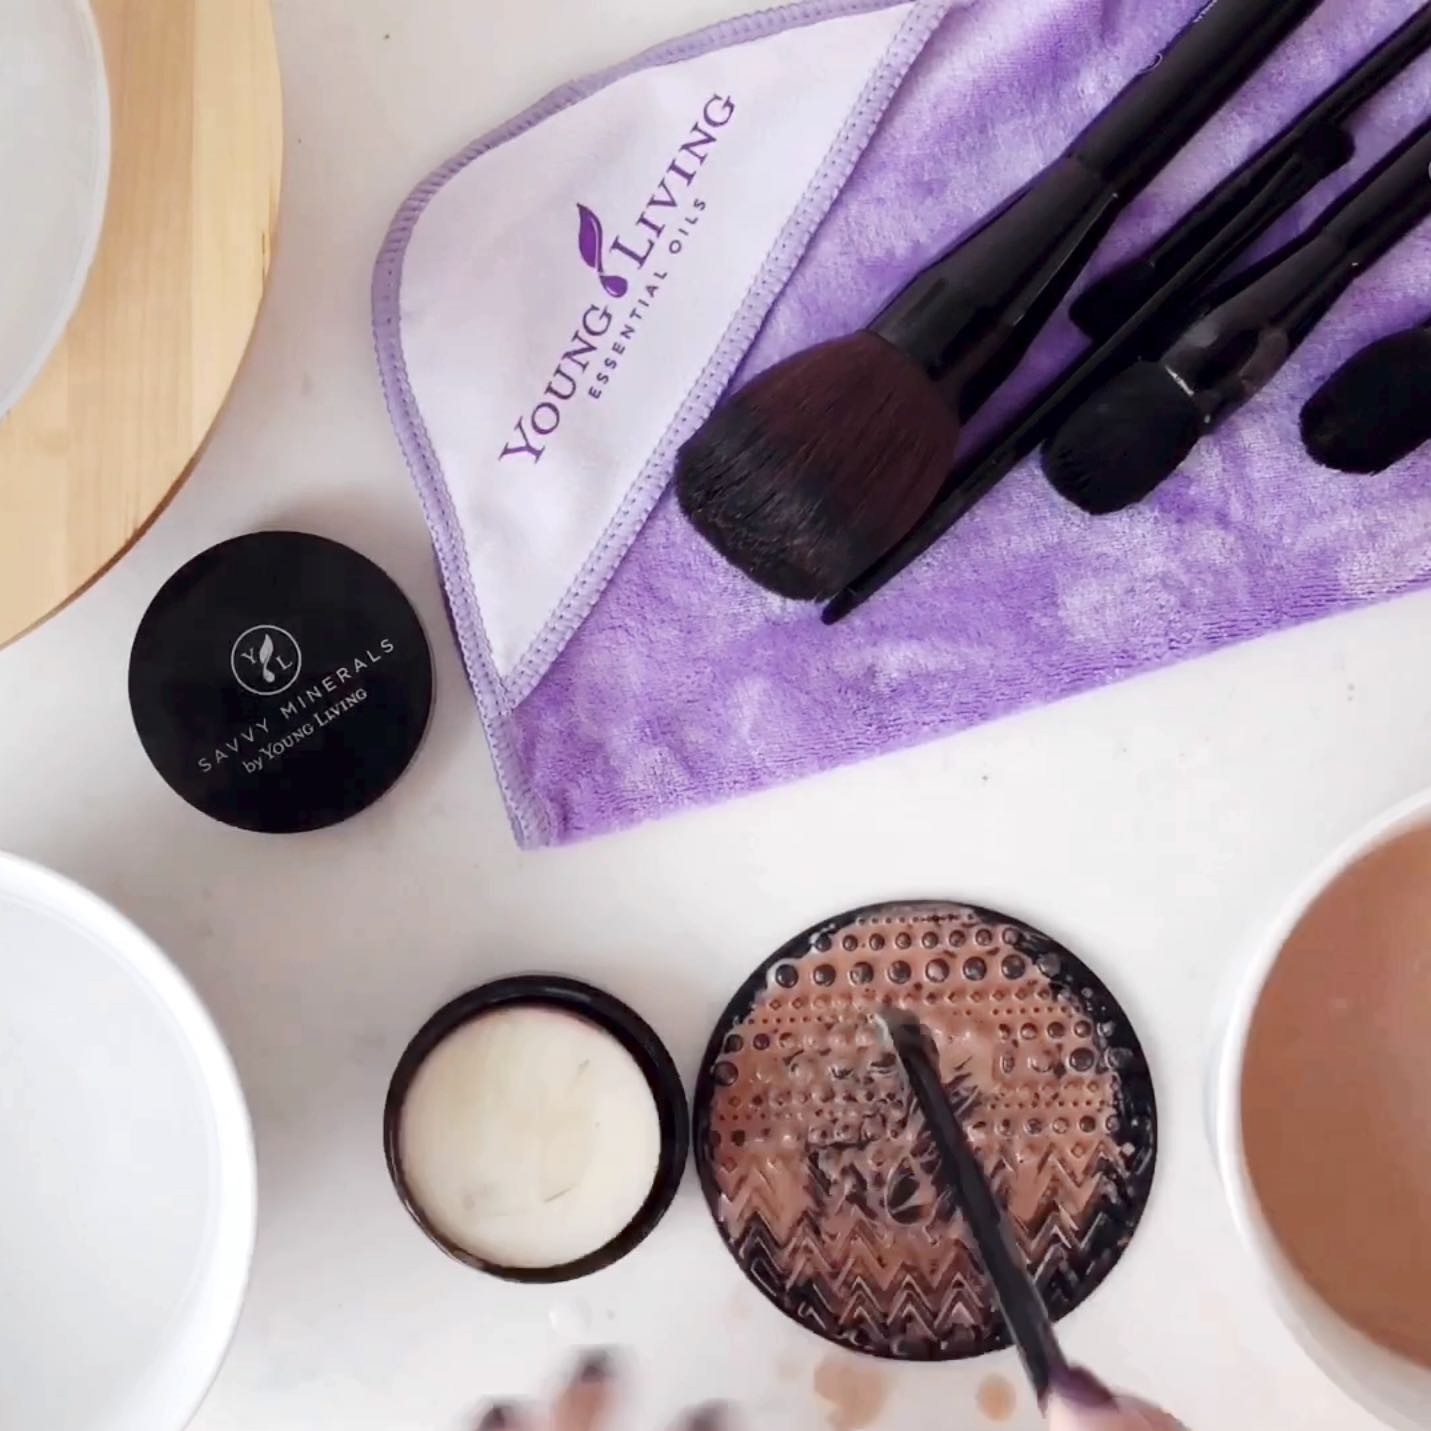 How To Clean Your Makeup Brushes | healthylivinghowto.com